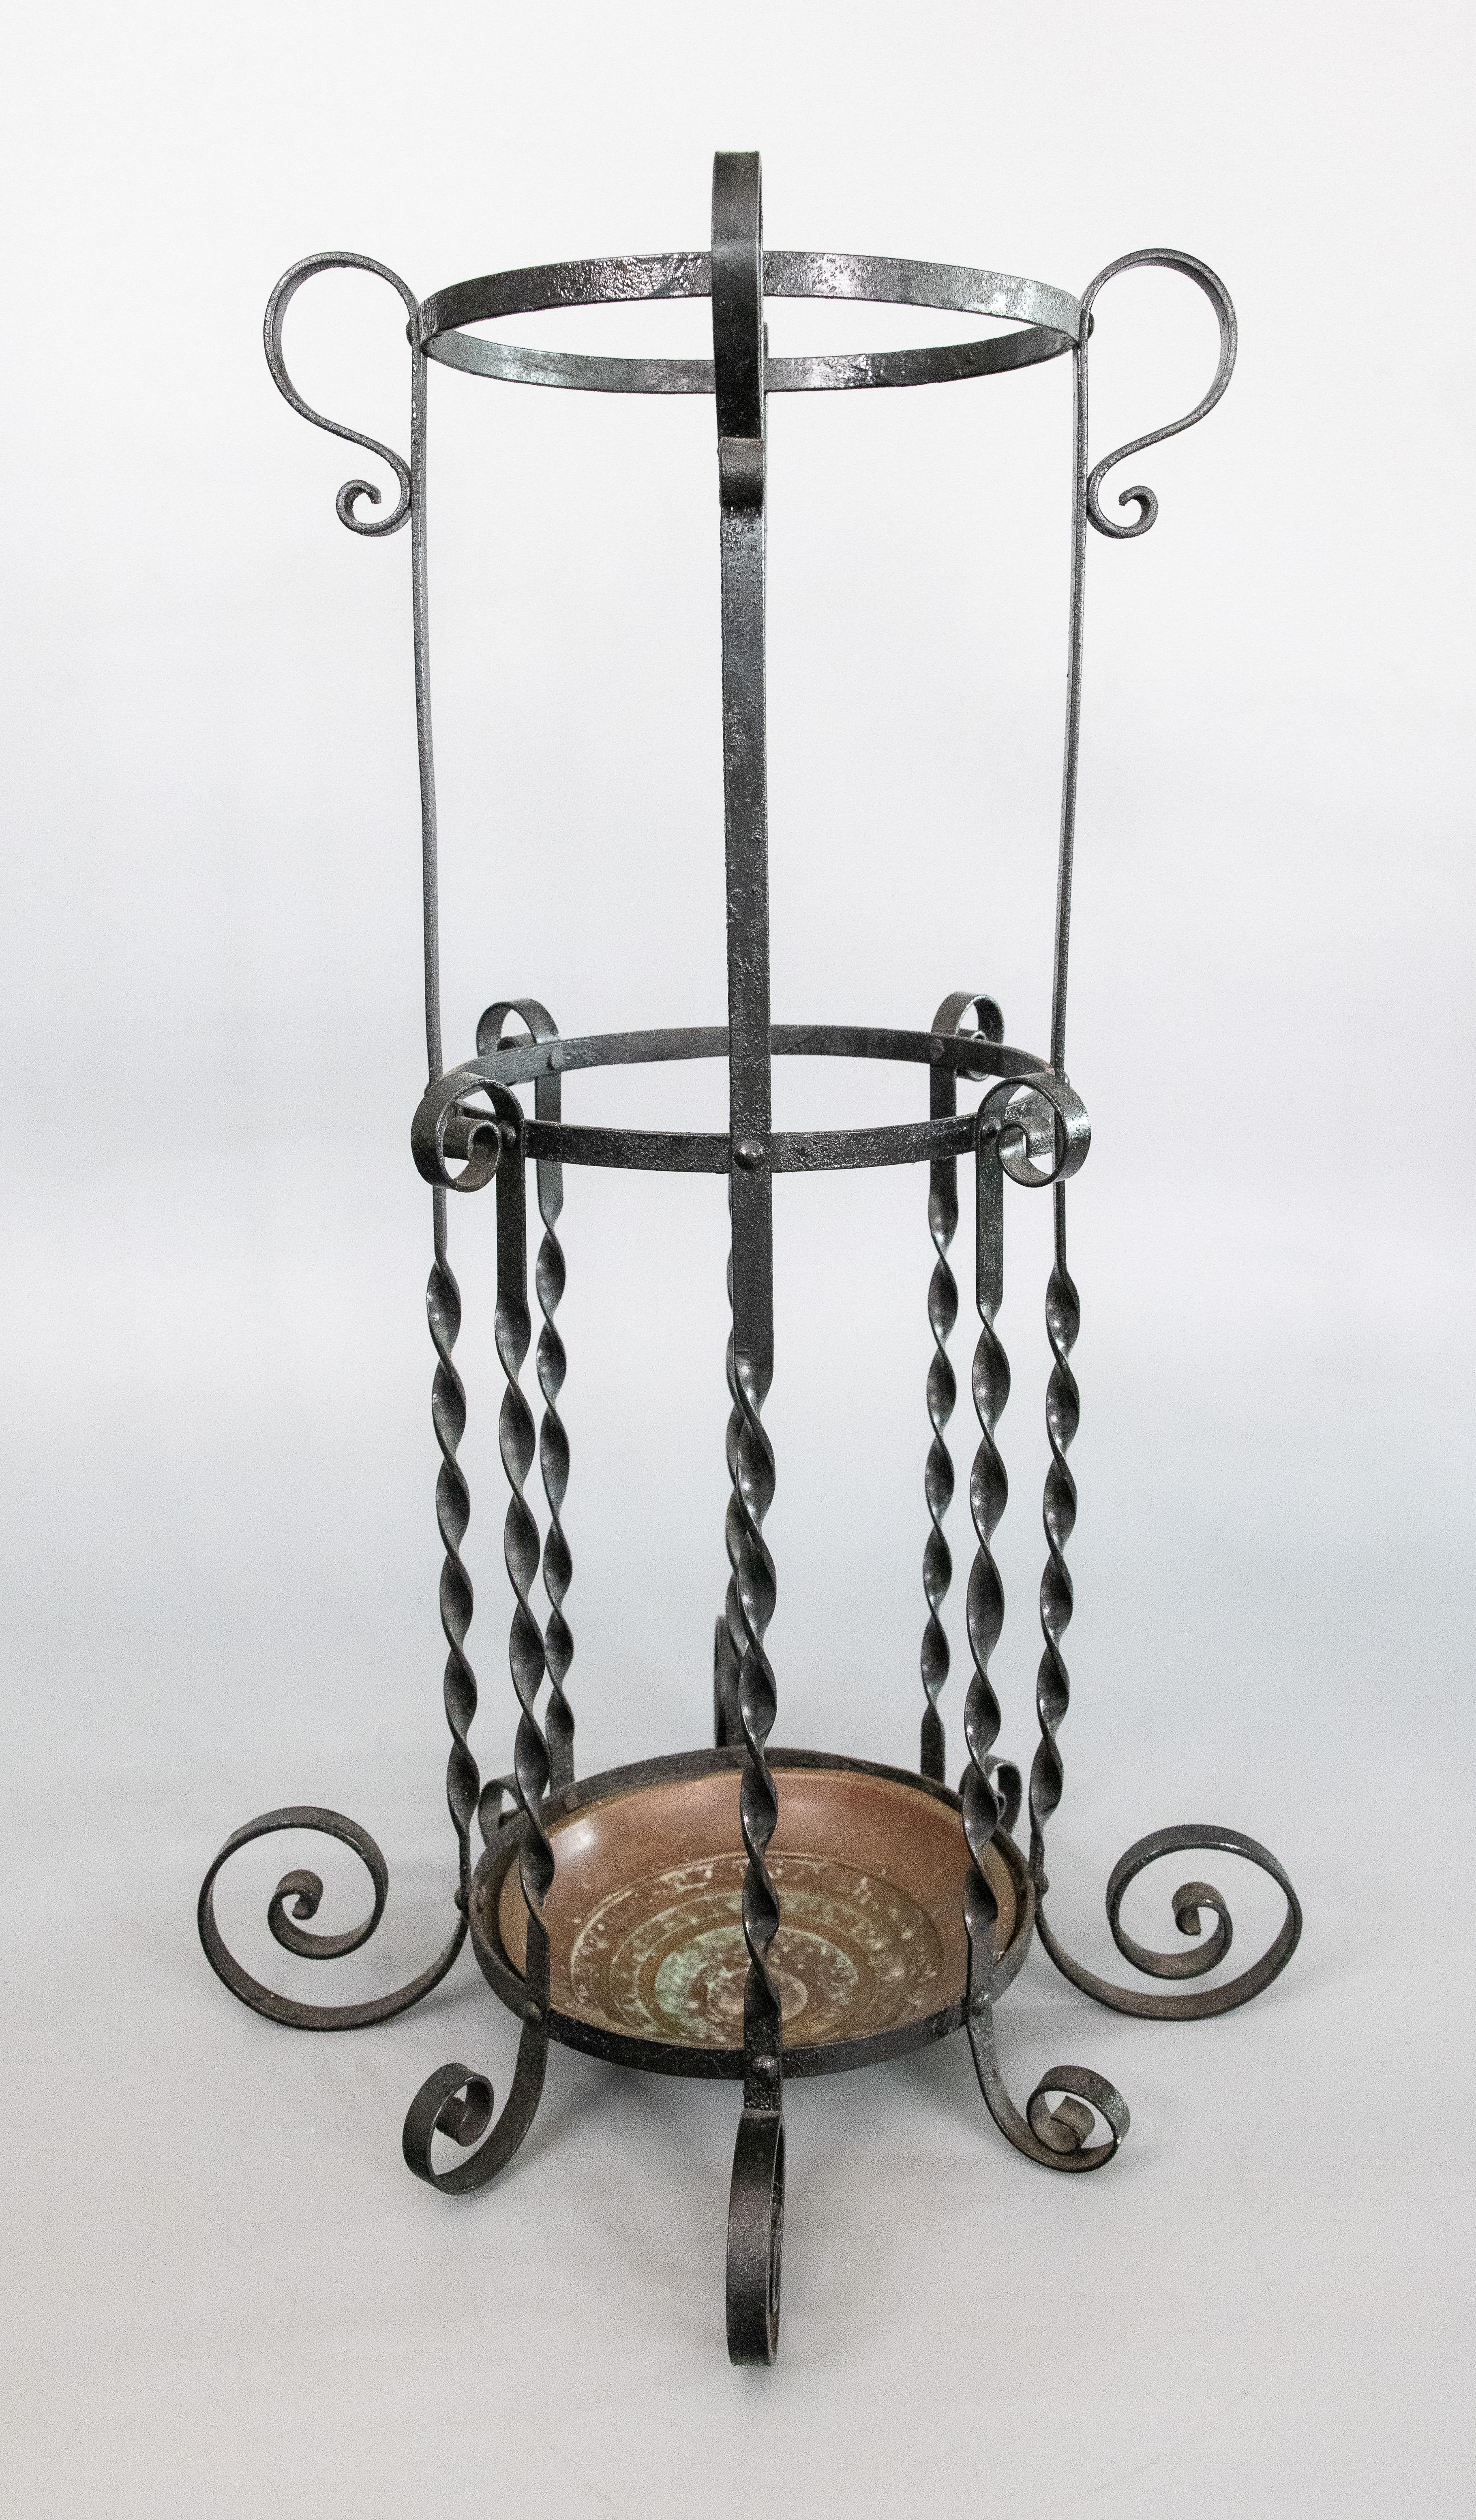 A lovely early 20th-Century French wrought iron umbrella or stick stand with the original copper liner. It's a fine quality hand crafted piece that would be stunning in an entryway for umbrellas or walking sticks.

DIMENSIONS
16.5ʺW × 16.5ʺD ×